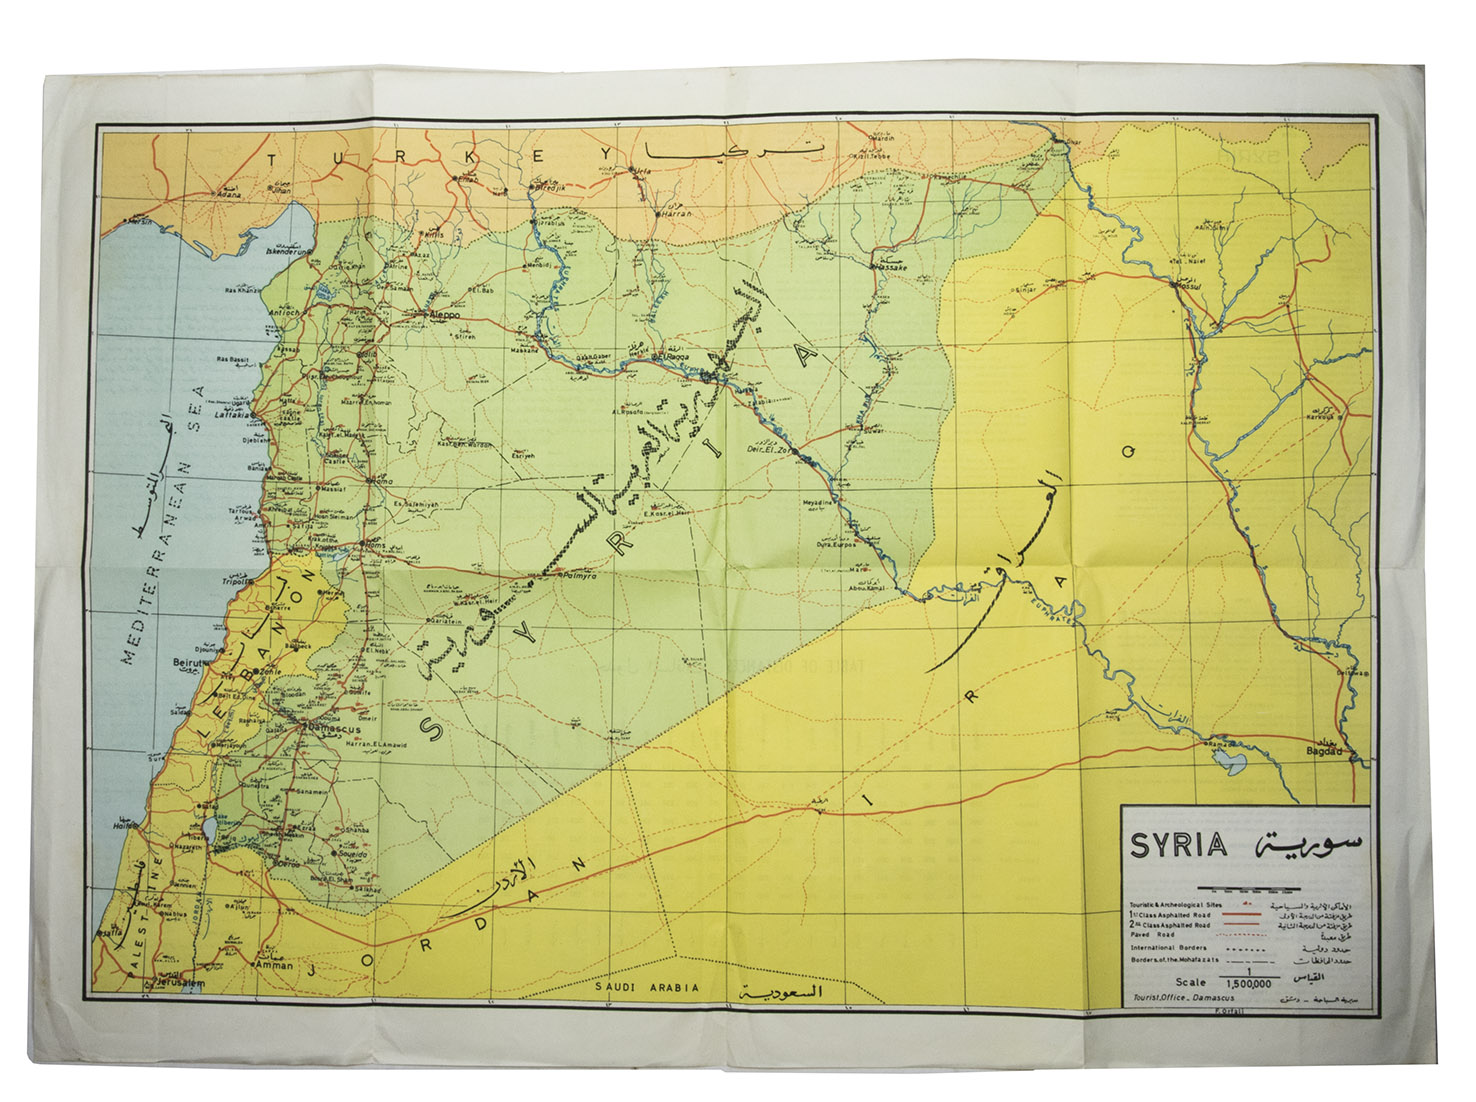 [SYRIA - BA'ATH ARAB SOCIALIST PARTY]. - Syria after two years of the March Revolution.[Syria, Ba'ath Arab Socialist Party], 1965. 24 x 17 cm. With 28 photos on 16 plates and some tables in the text. With: [MAP - SYRIAN ARAB REPUBLIC MINISTRY OF ECONOMY DIRECTORATE OF TOURISM]. Syria.Damascus, Tourist Office, [ca. 1965]. Folded. 70 x 49.5 cm.A brightly coloured folding map of Syria with some information about the country and its principal cities with a table of distances on the back, all text in the map and on the back is in English and Arabic.Original publisher's printed wrappers, stapled.